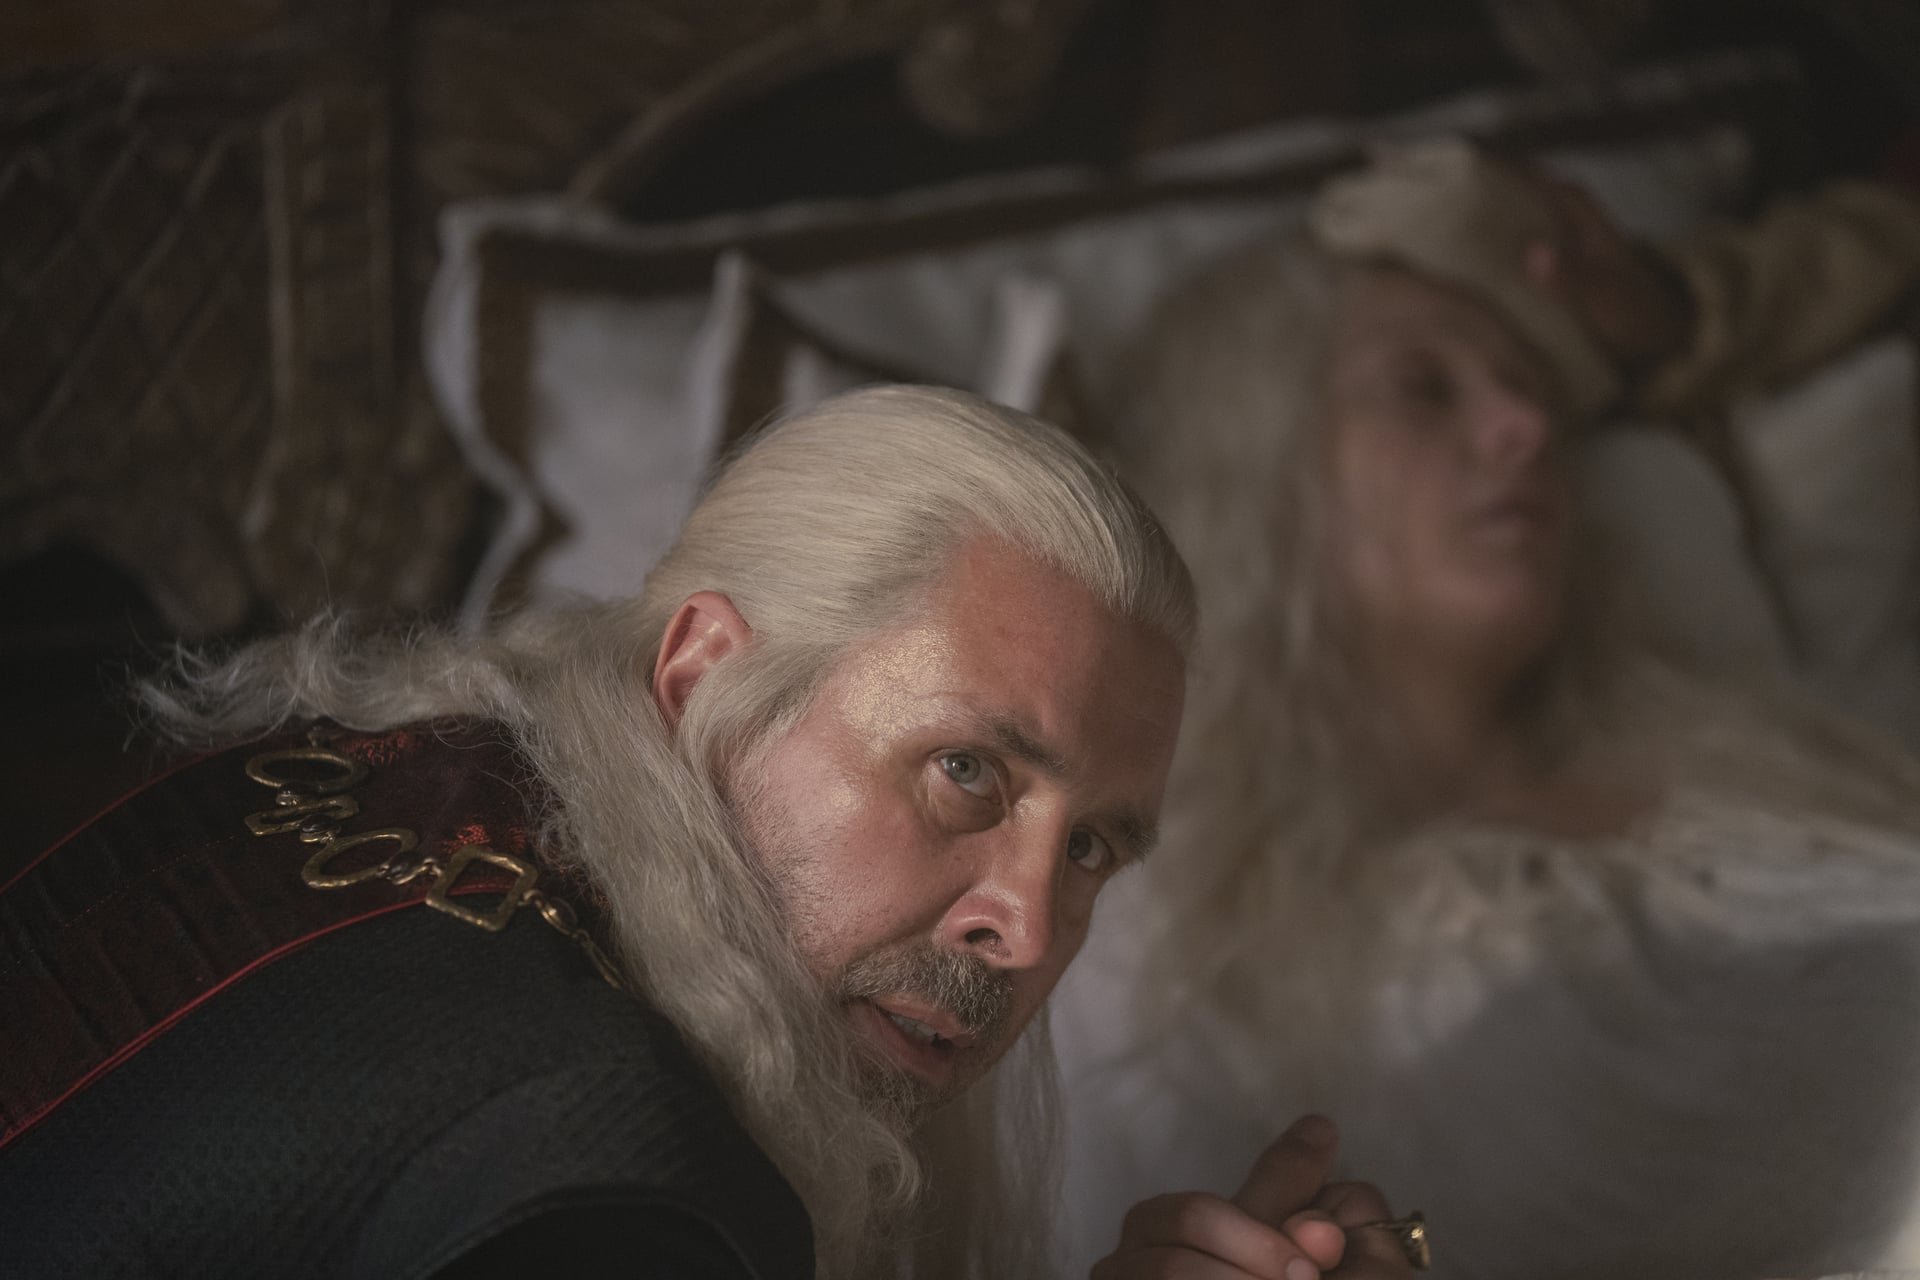 Paddy Considine as King Viserys with Queen Aemma